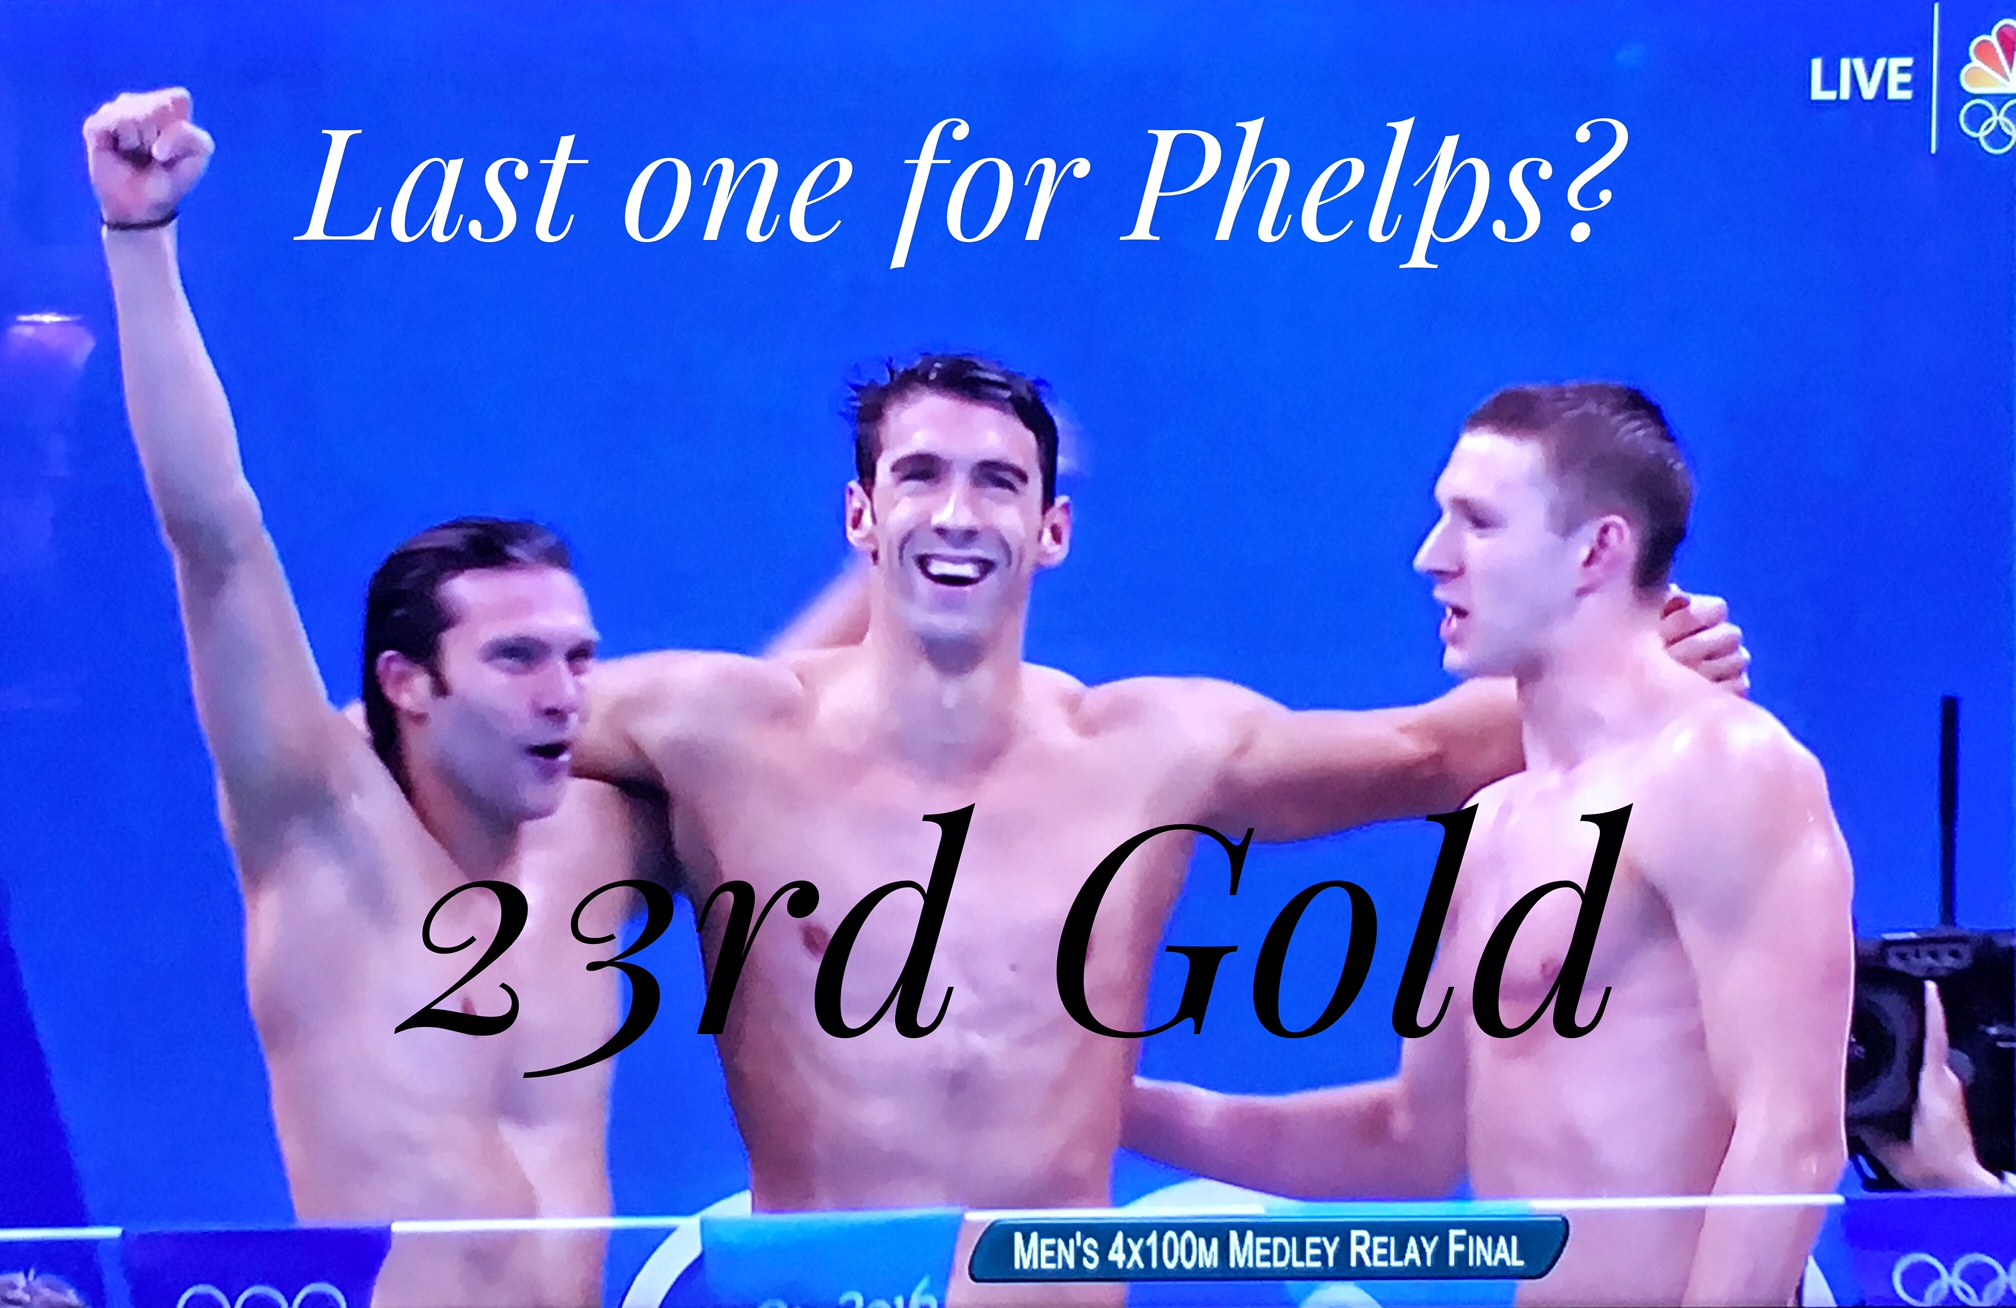 Phelps 23rd Gold